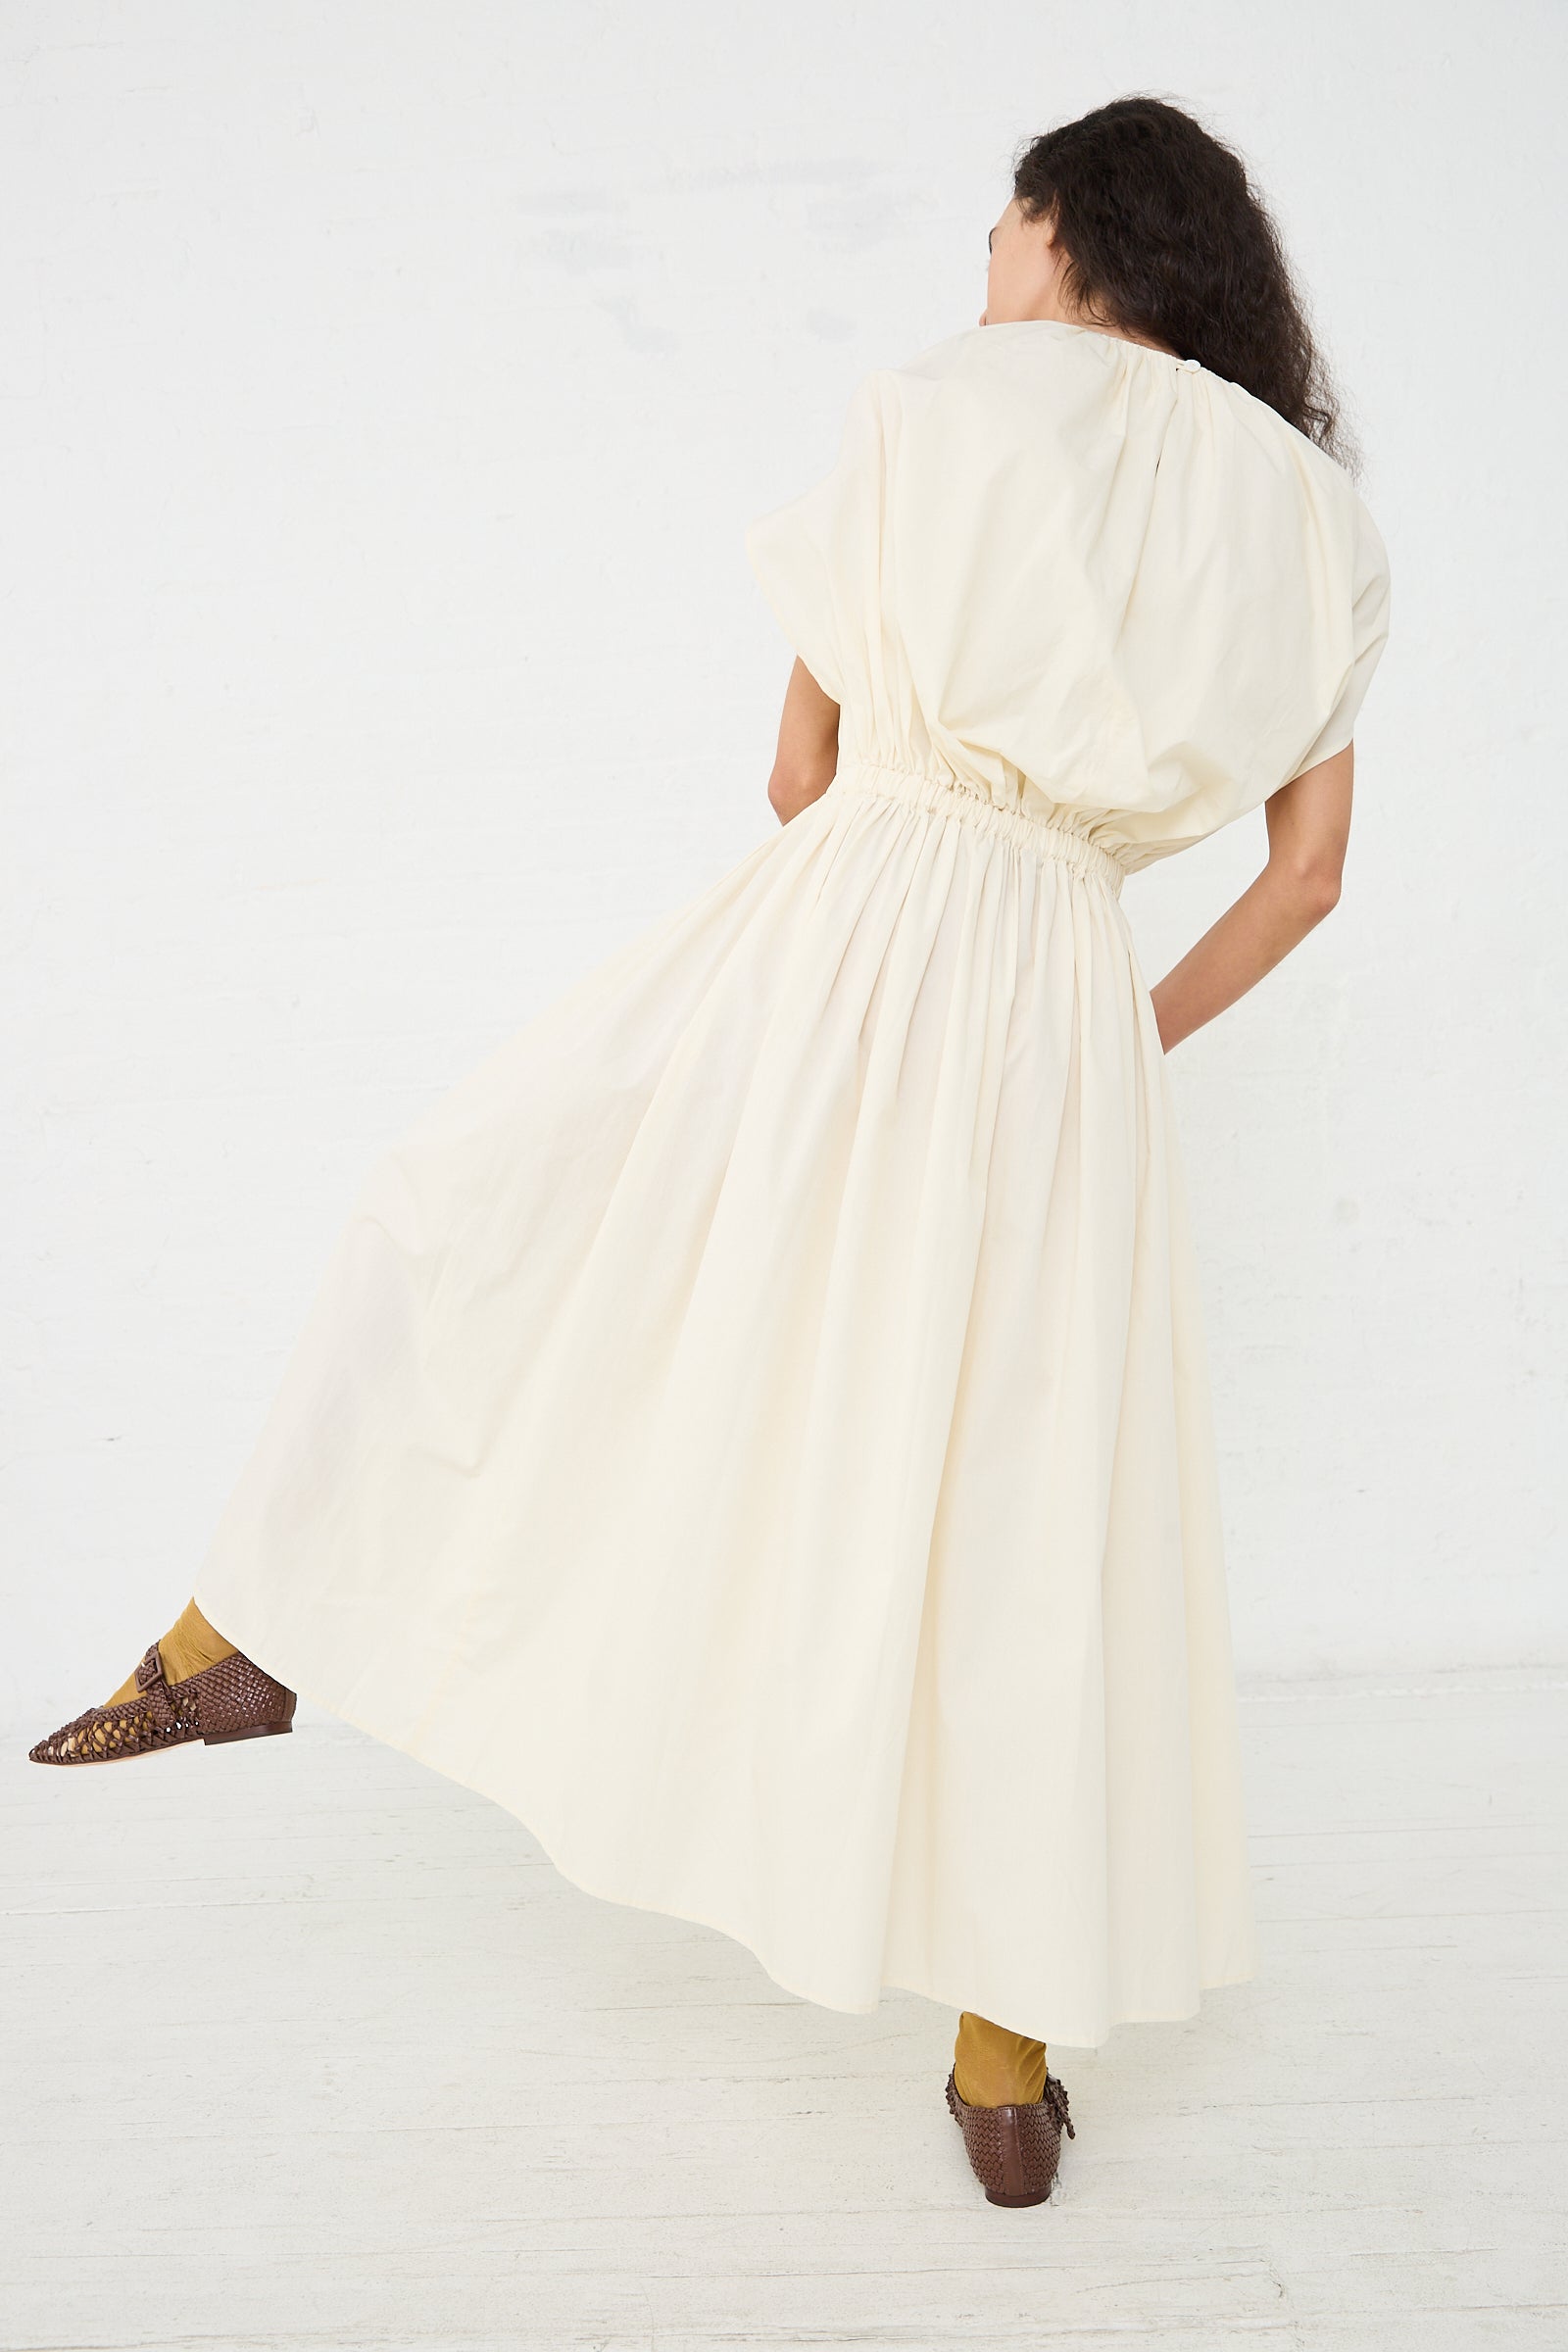 Woman in a sleeveless, flowing Black Crane Organic Cotton Shell Dress in Cream with a cinched waist, posing from the back.